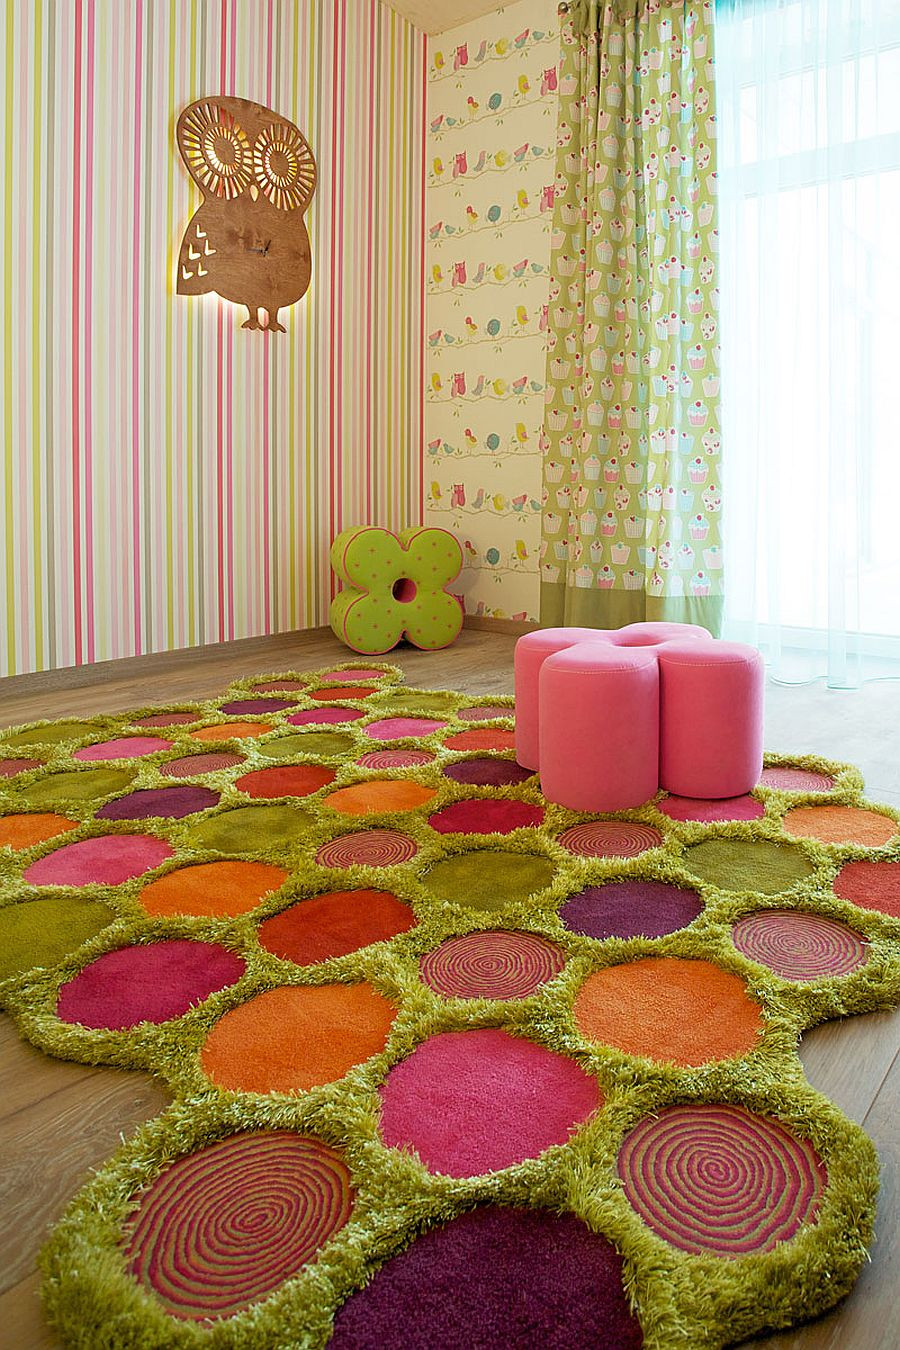 Rug Kids Room
 Colorful Zest 25 Eye Catching Rug Ideas for Kids’ Rooms